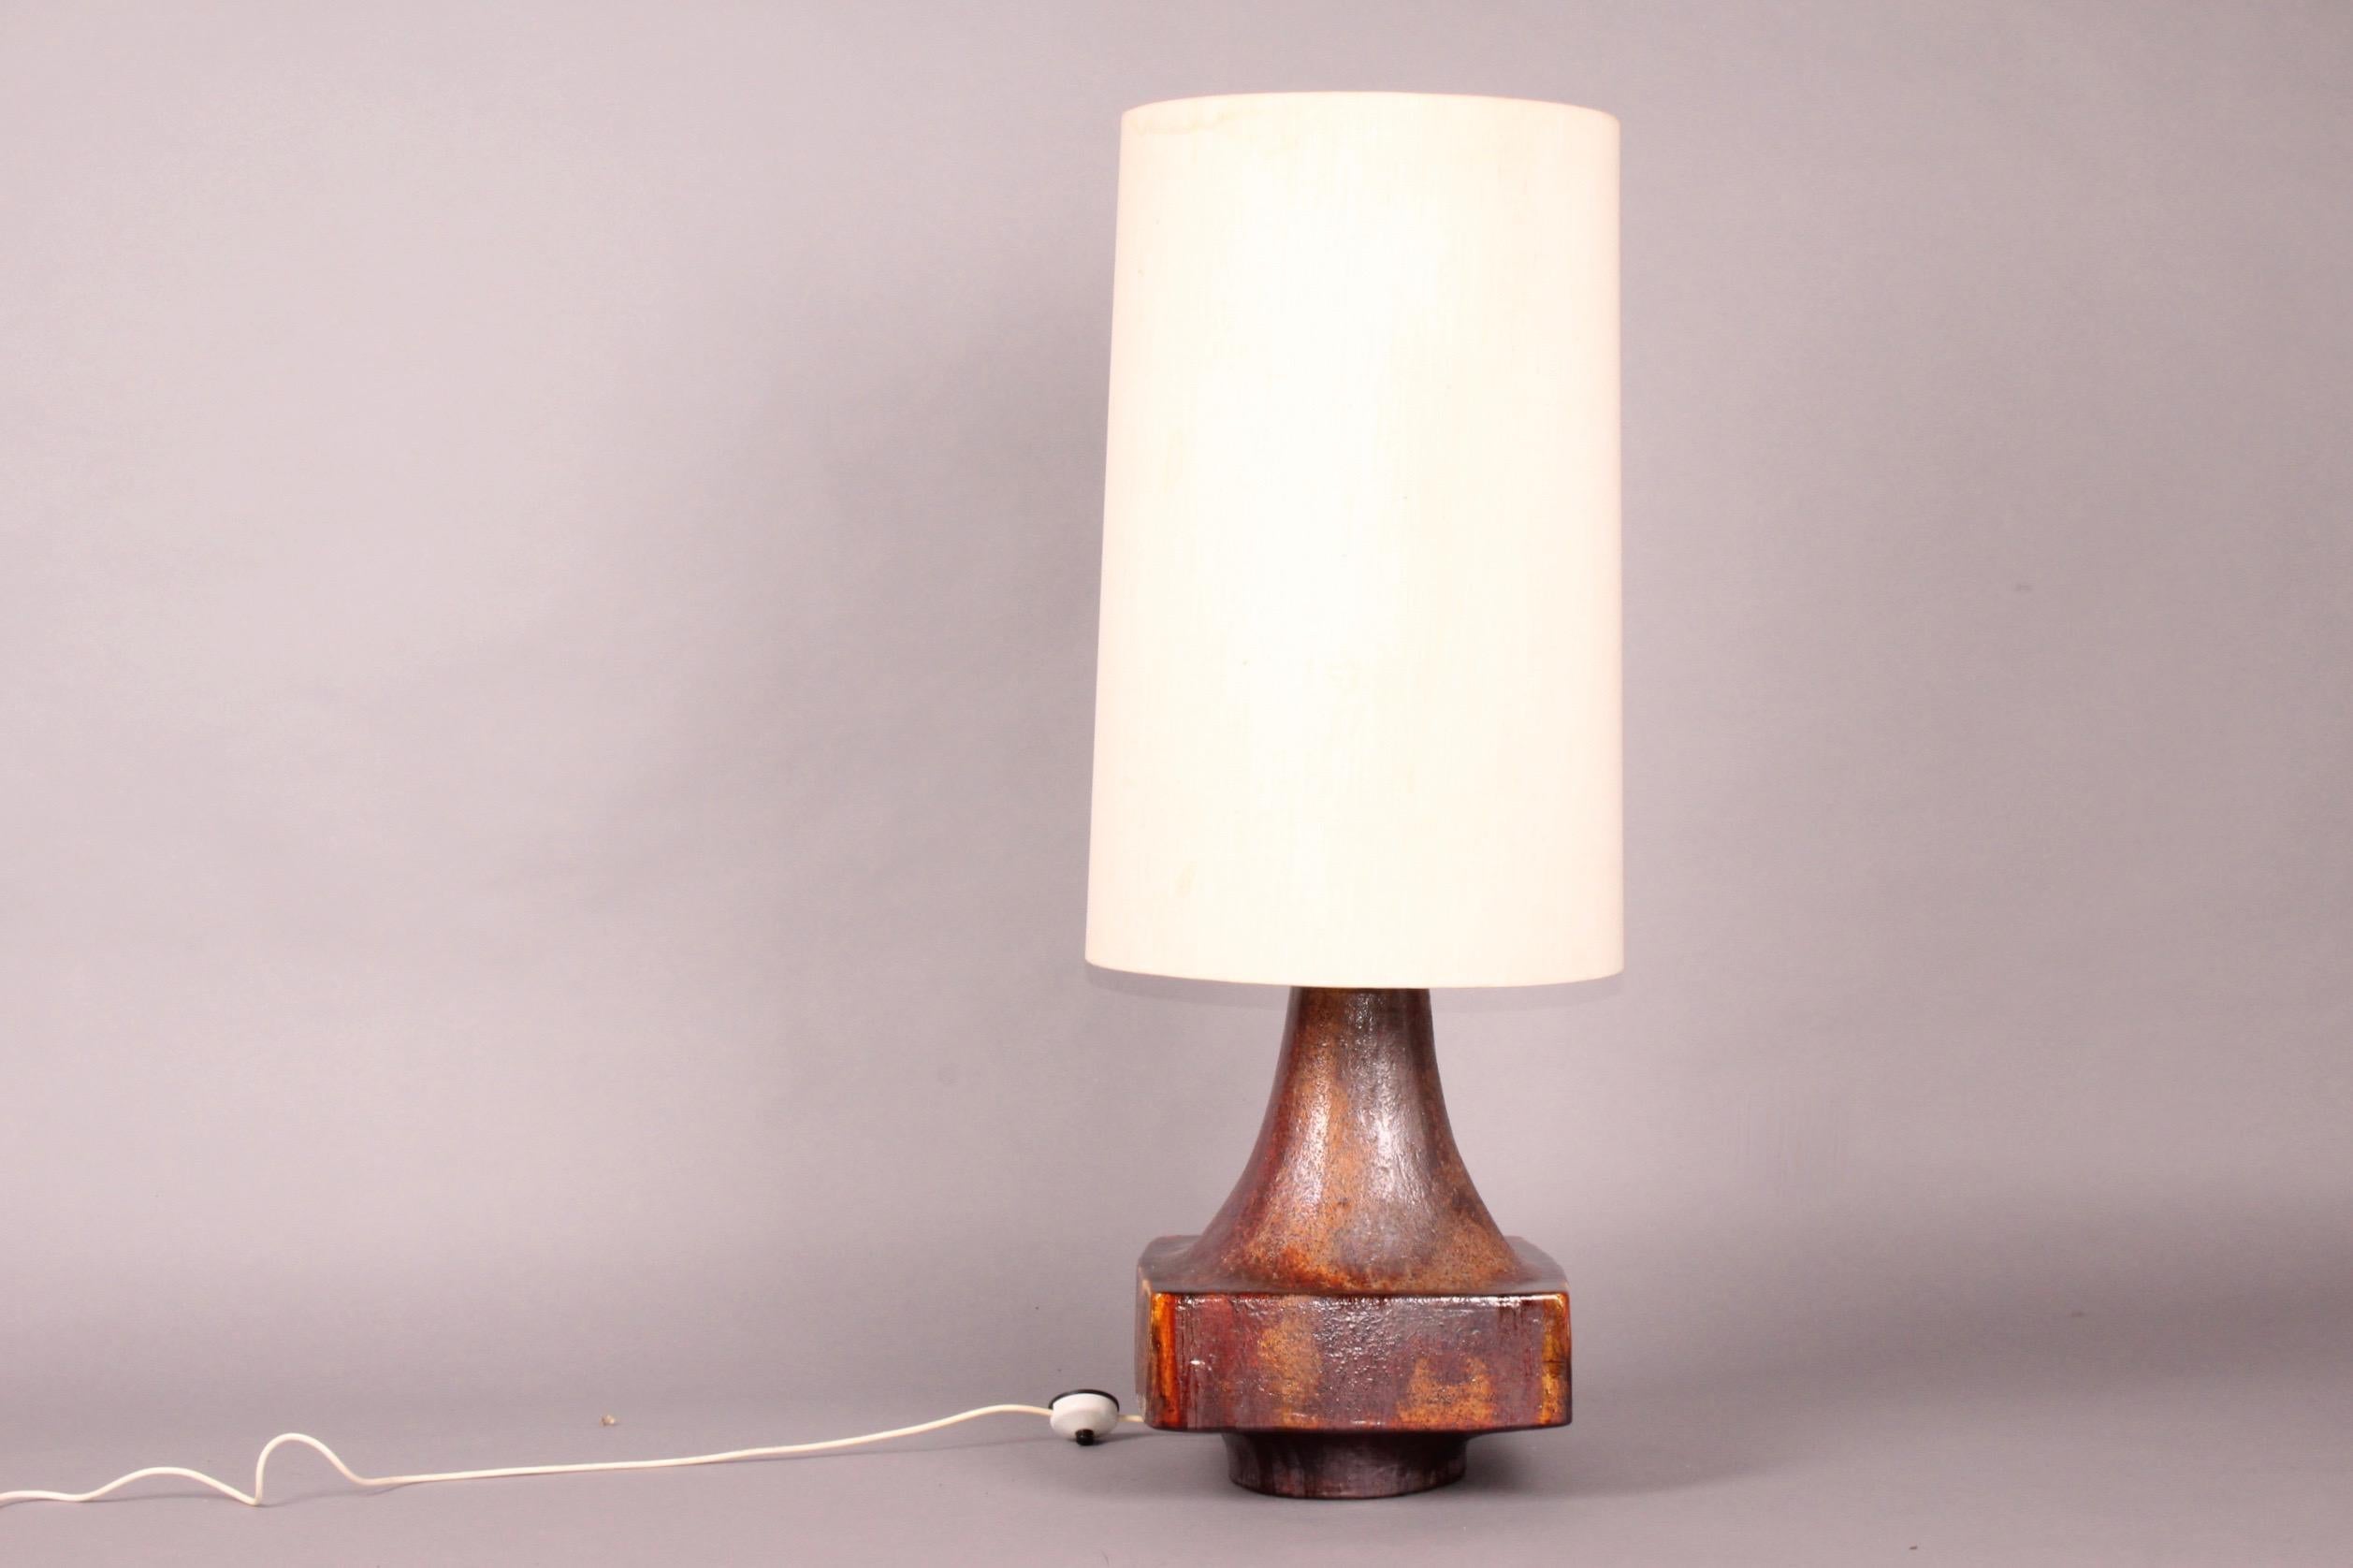 Big ceramic table lamp, some stain on the shade, see photo, dimensions without shade H 130 cm. 37 by 37 cm.